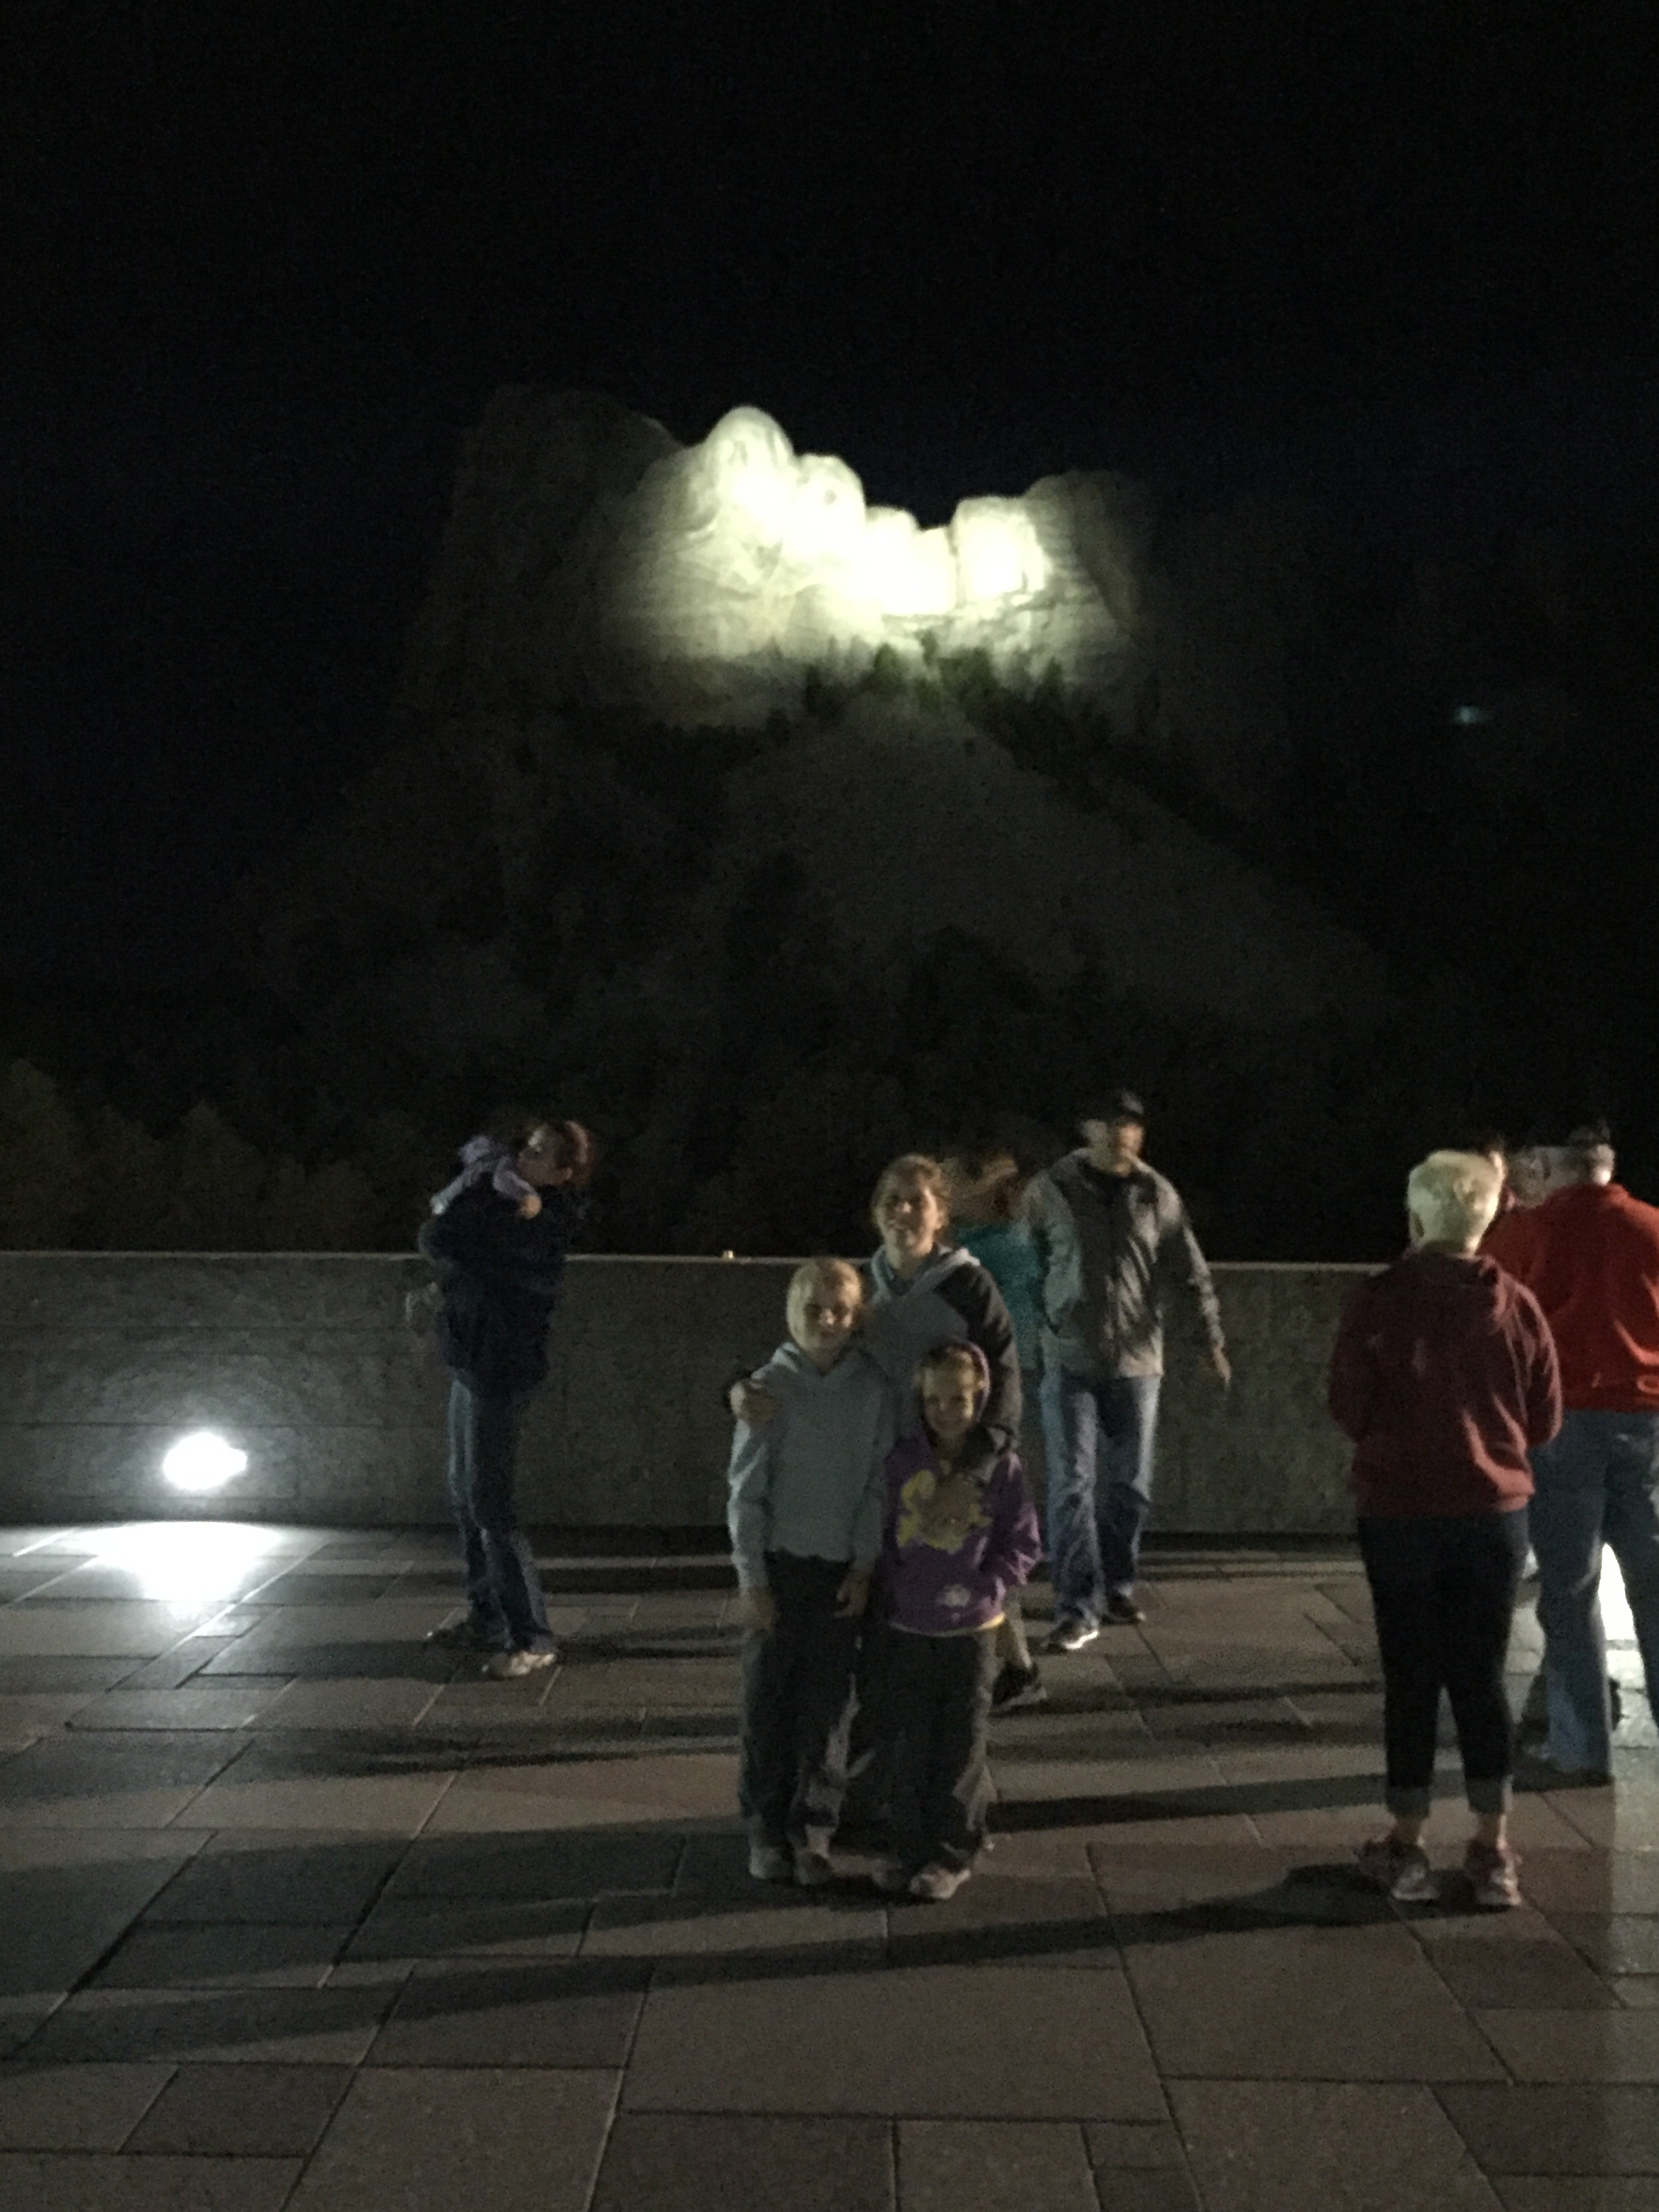  First time with our children at Mt. Rushmore. Jennifer and I had never seen it at night. What an amazing experience! 